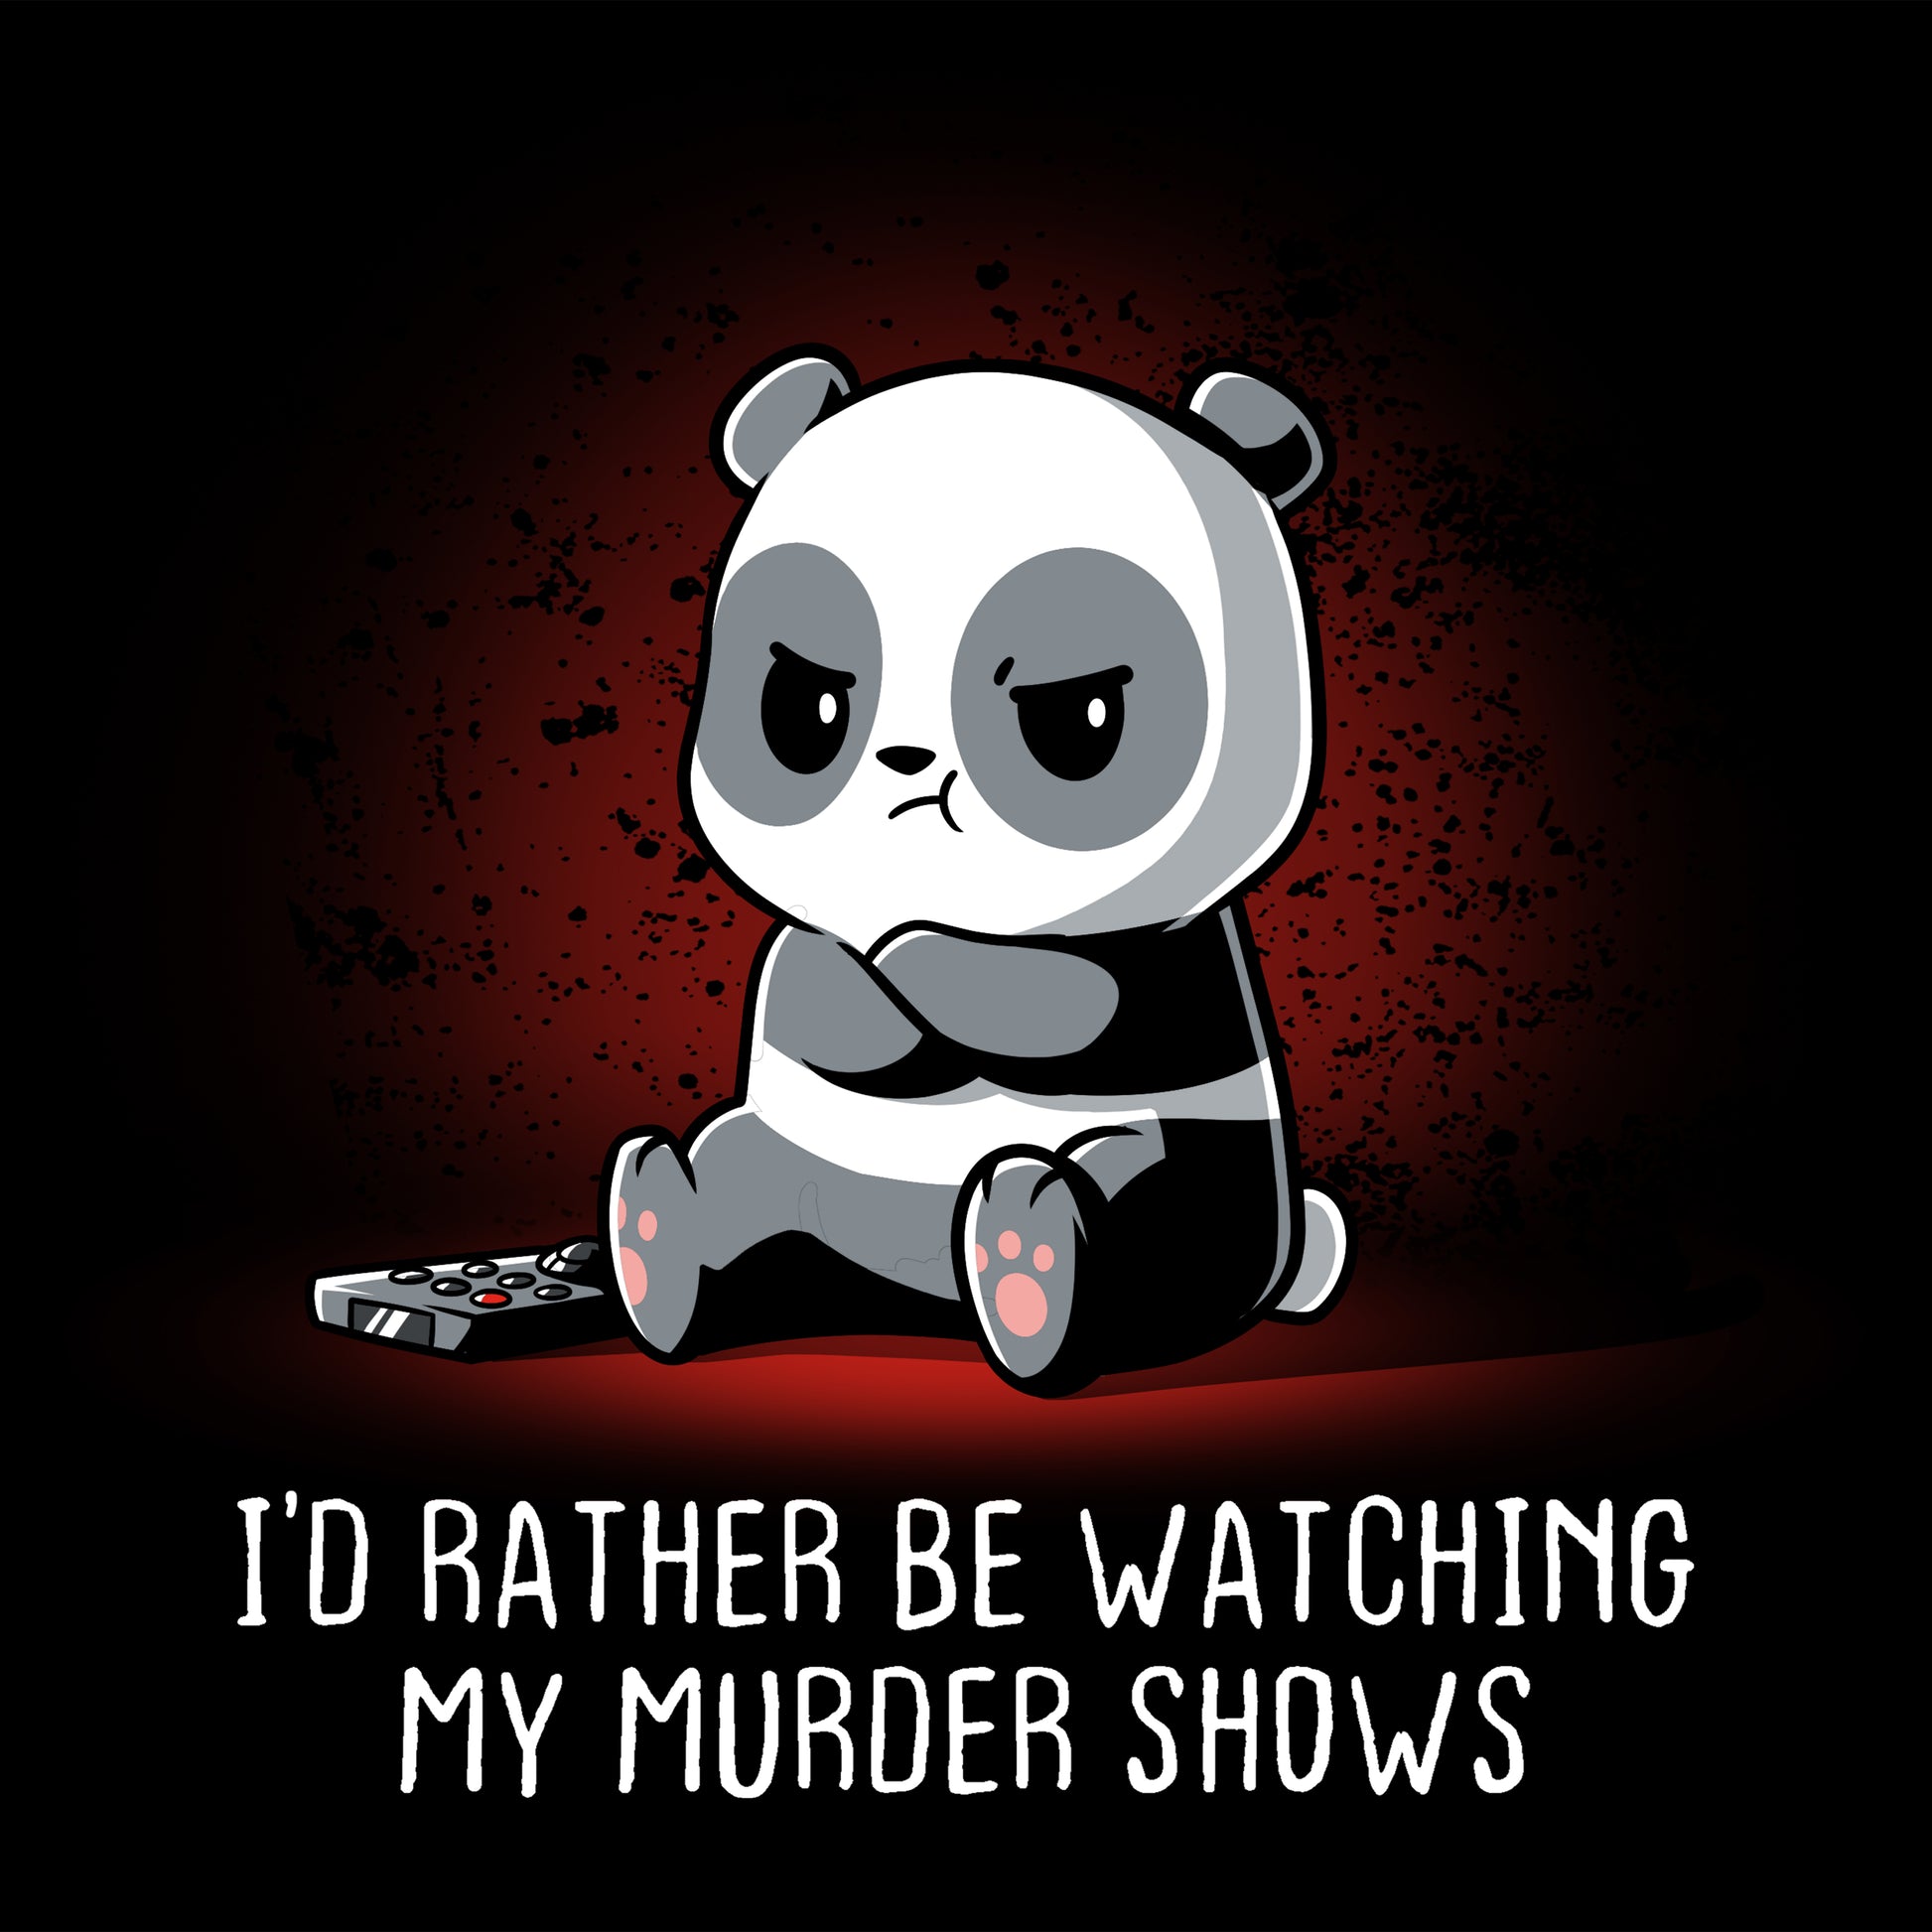 A panda bear obsessed with I'd Rather Be Watching My Murder Shows and TeeTurtle.